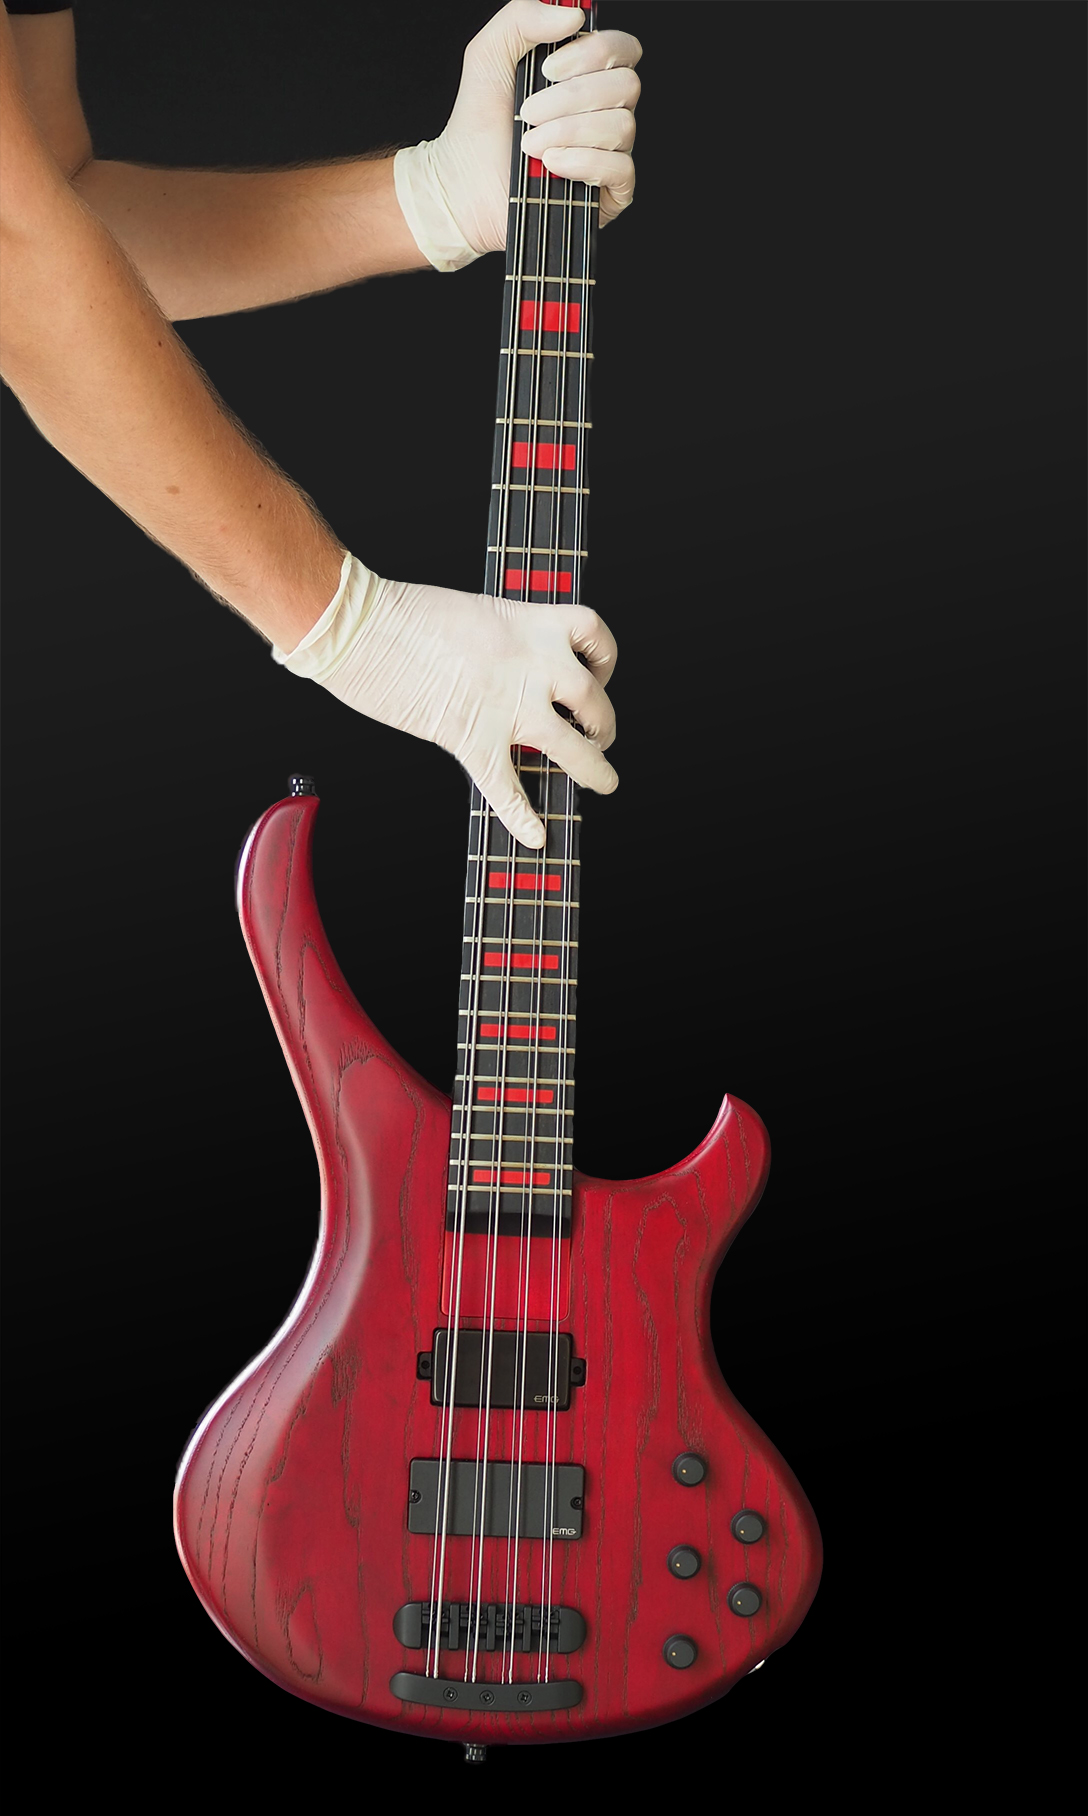 Picture of the bass